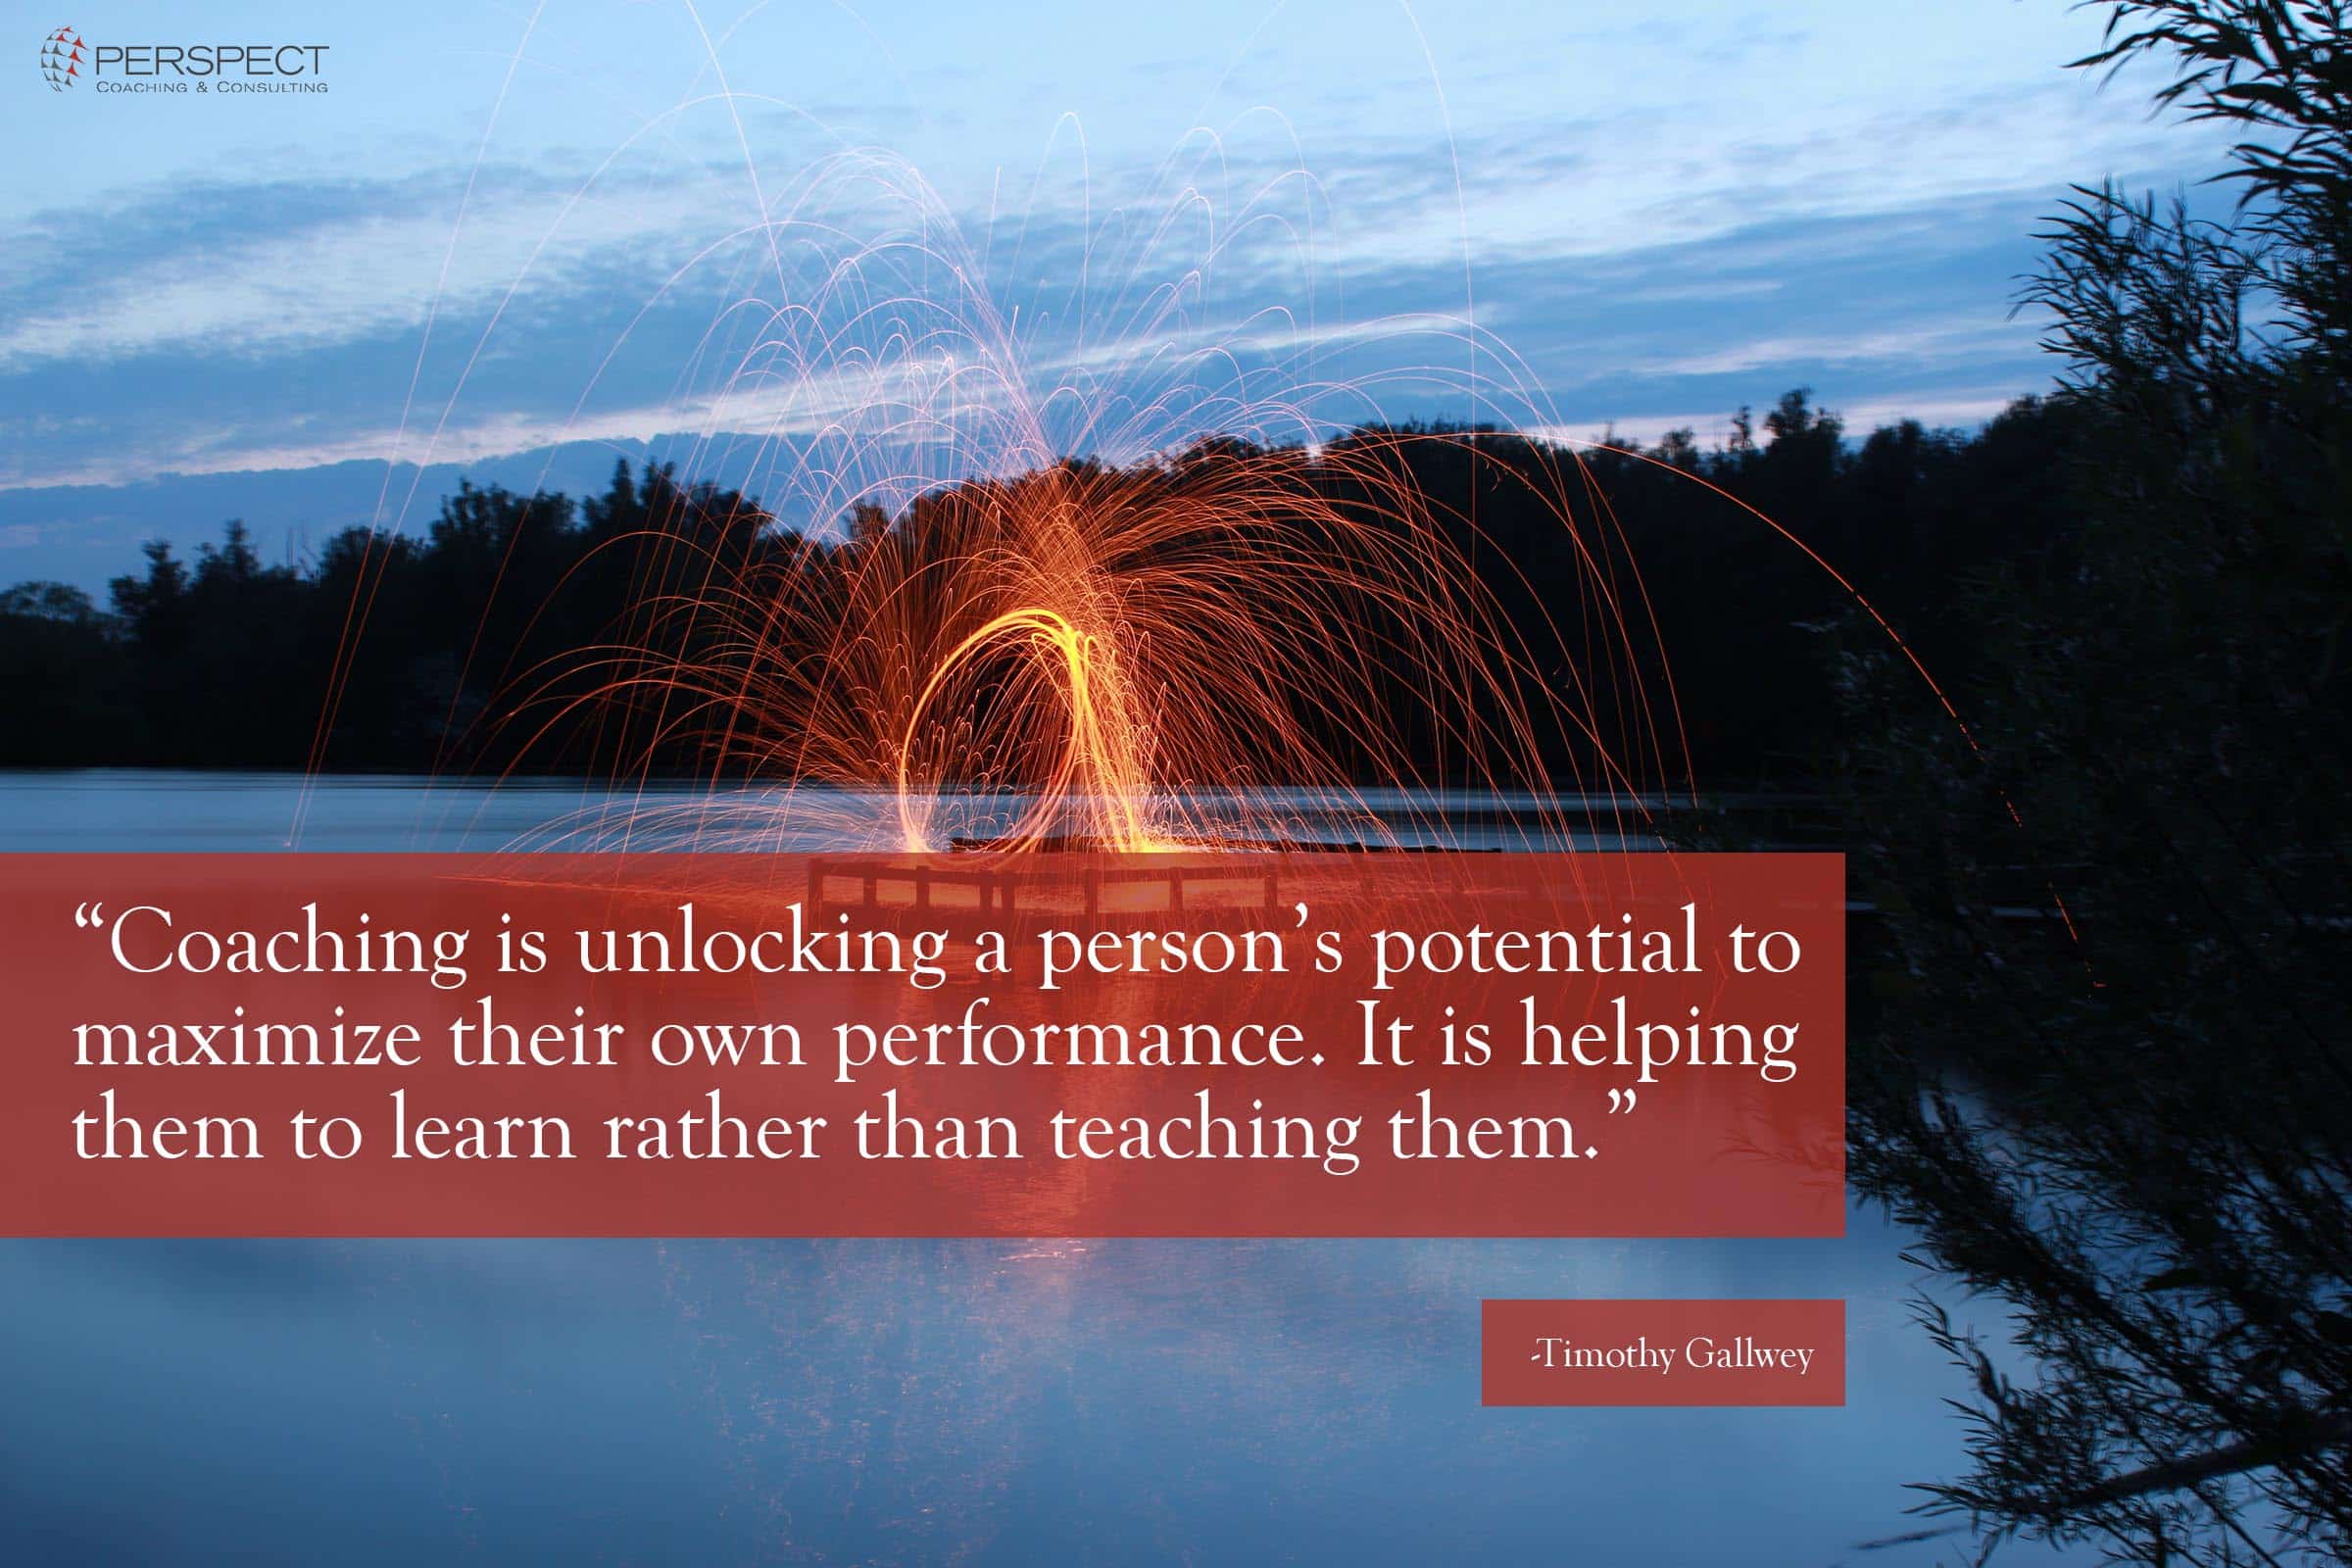 Coaching is unlocking a person’s potential to